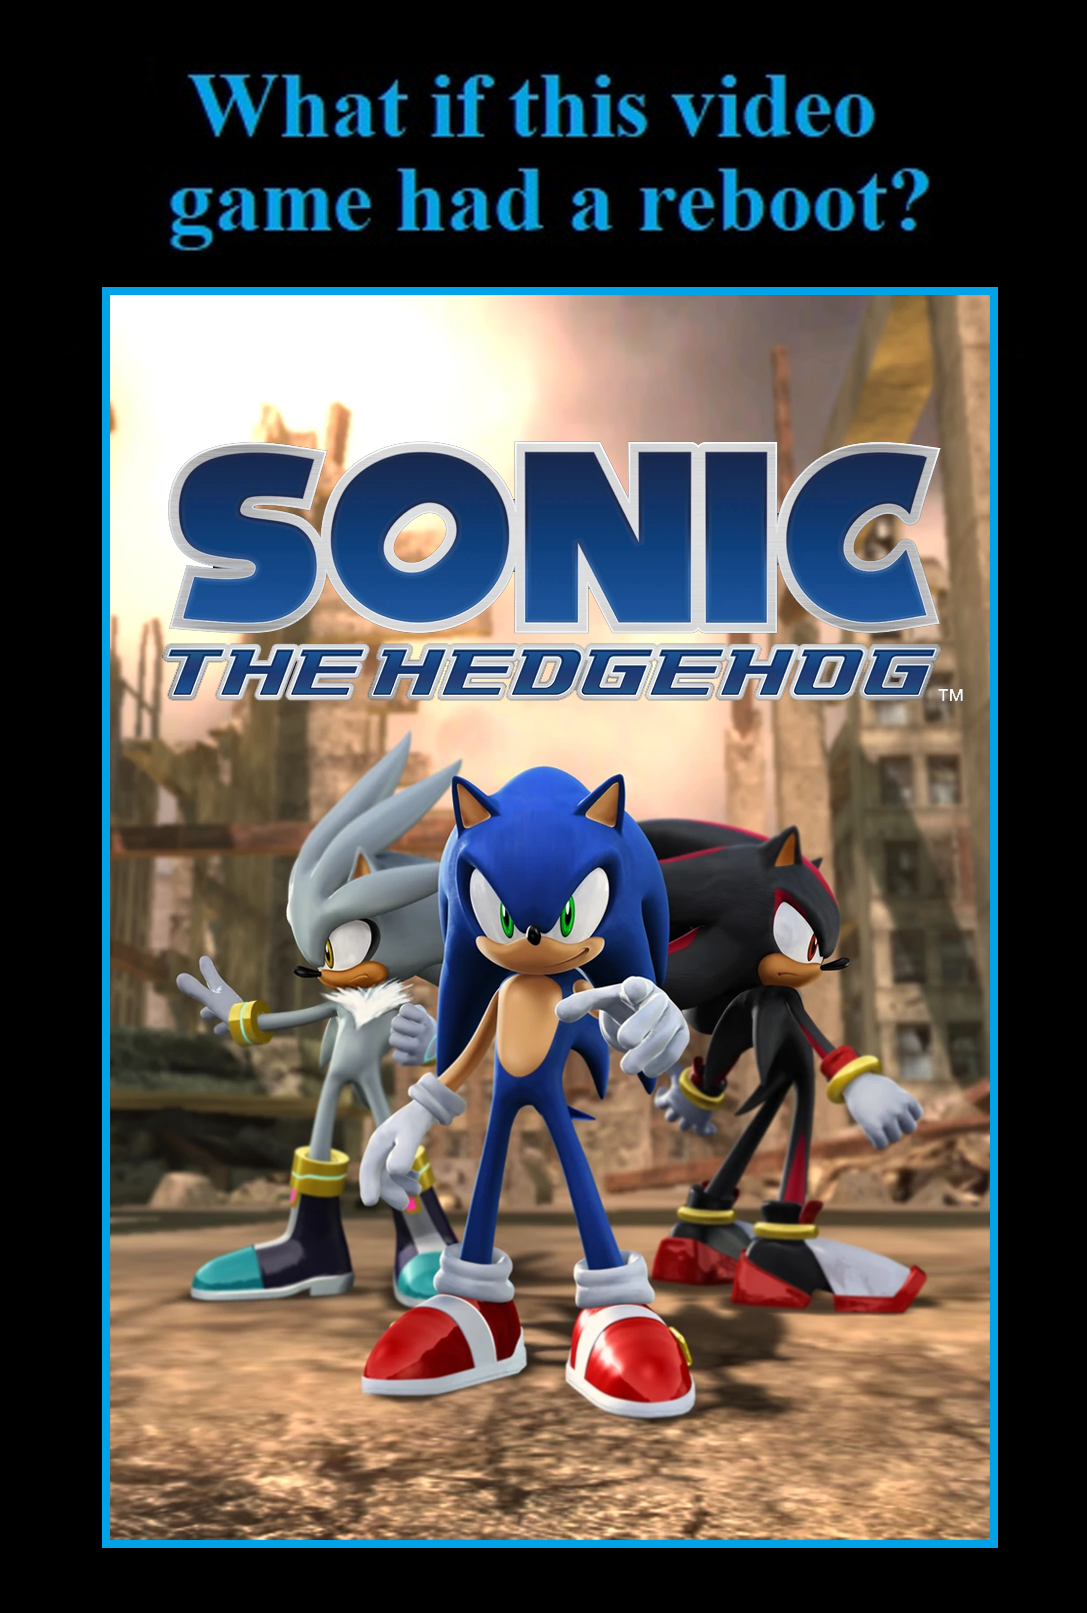 What if Sonic the Hedgehog '06 had a reboot?